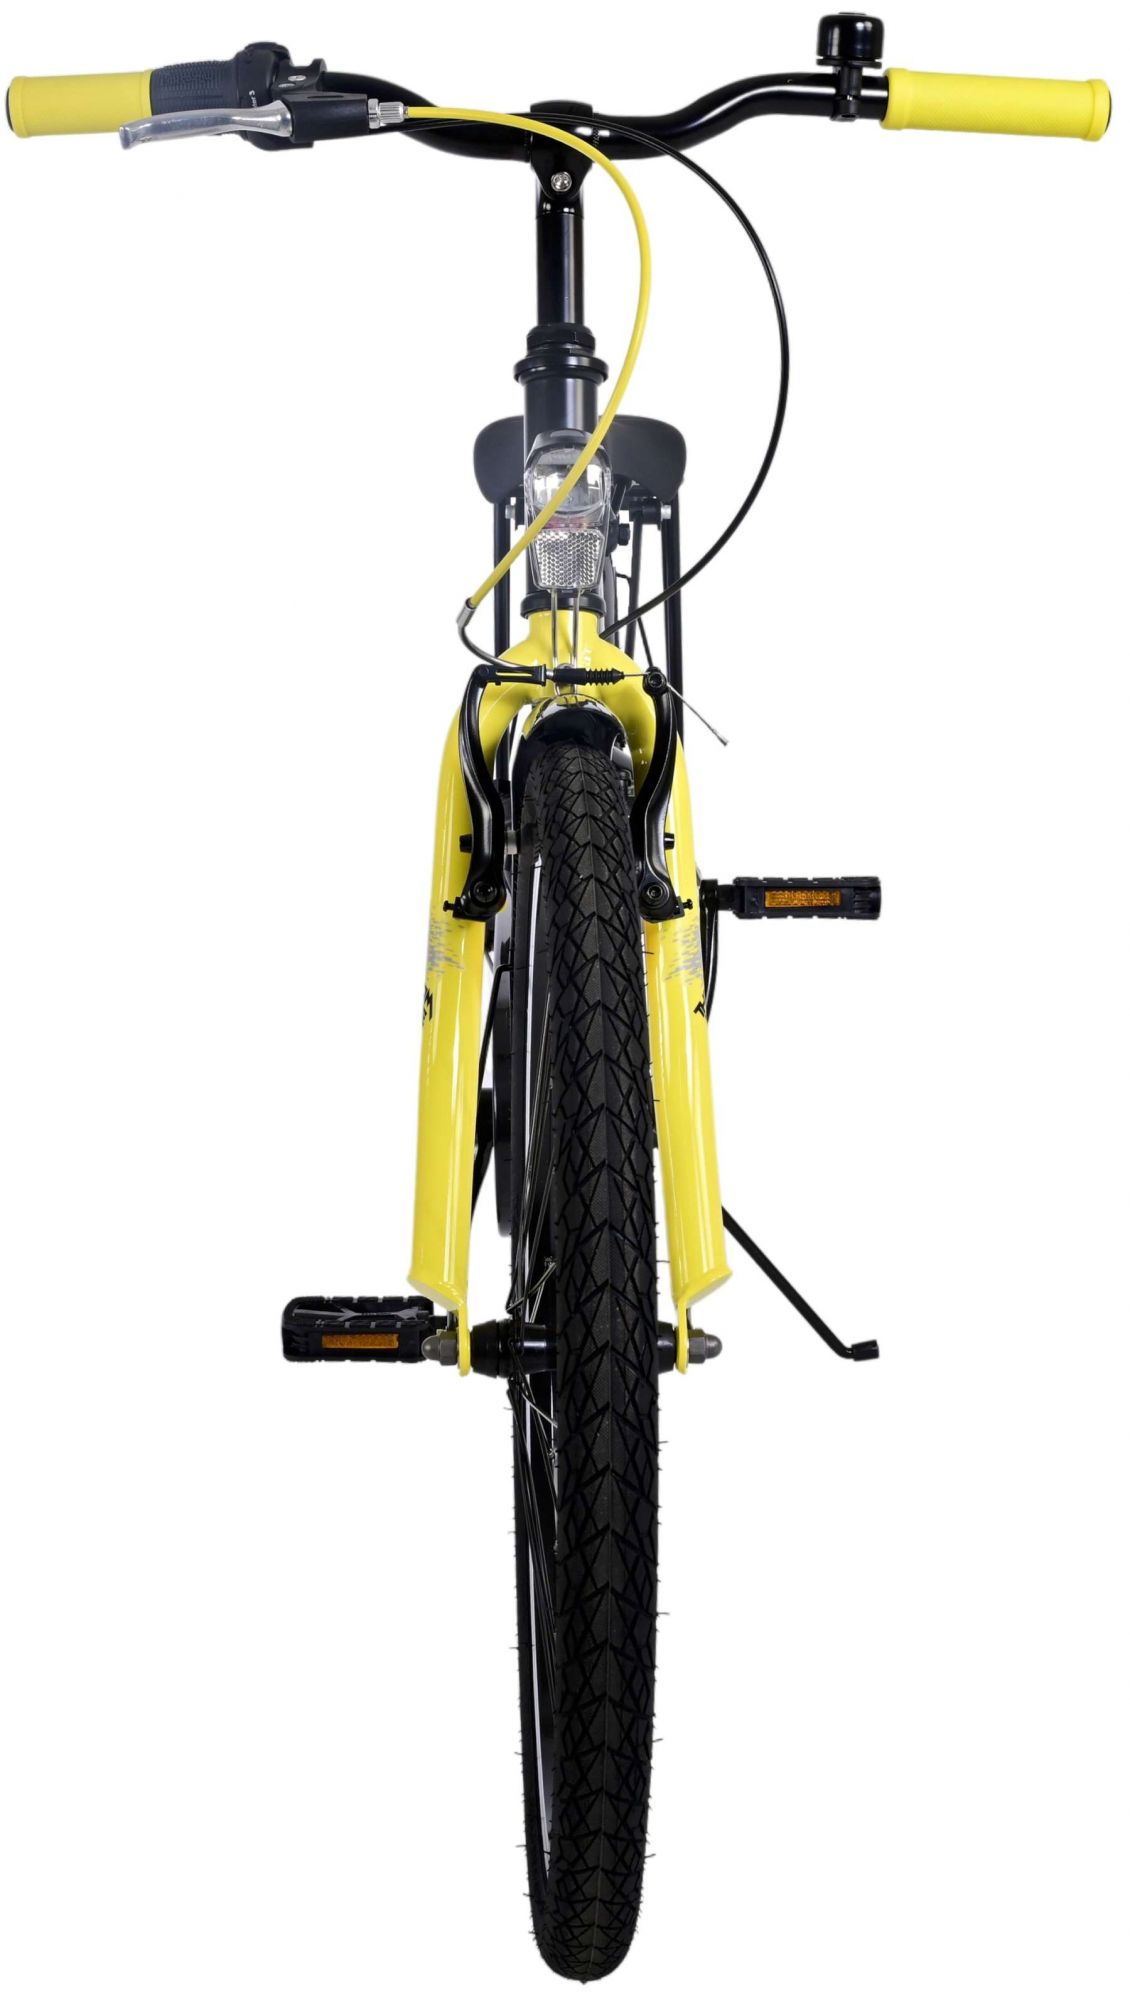 Thombike_24_inch_-_6-W1800_4adc-wd